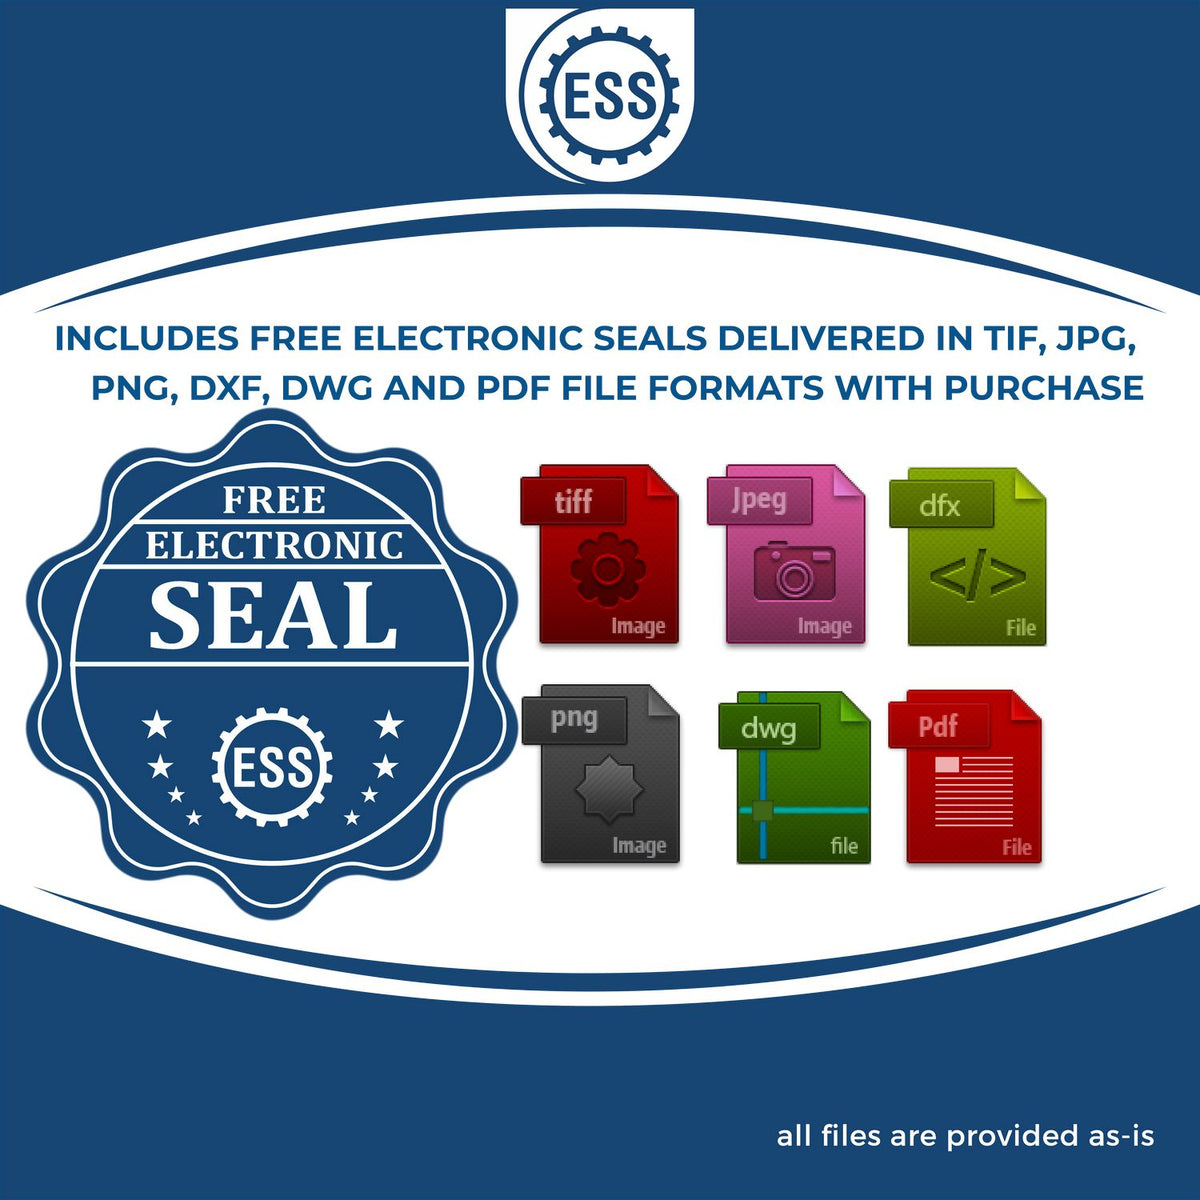 An infographic for the free electronic seal for the Heavy Duty Cast Iron Indiana Land Surveyor Seal Embosser illustrating the different file type icons such as DXF, DWG, TIF, JPG and PNG.